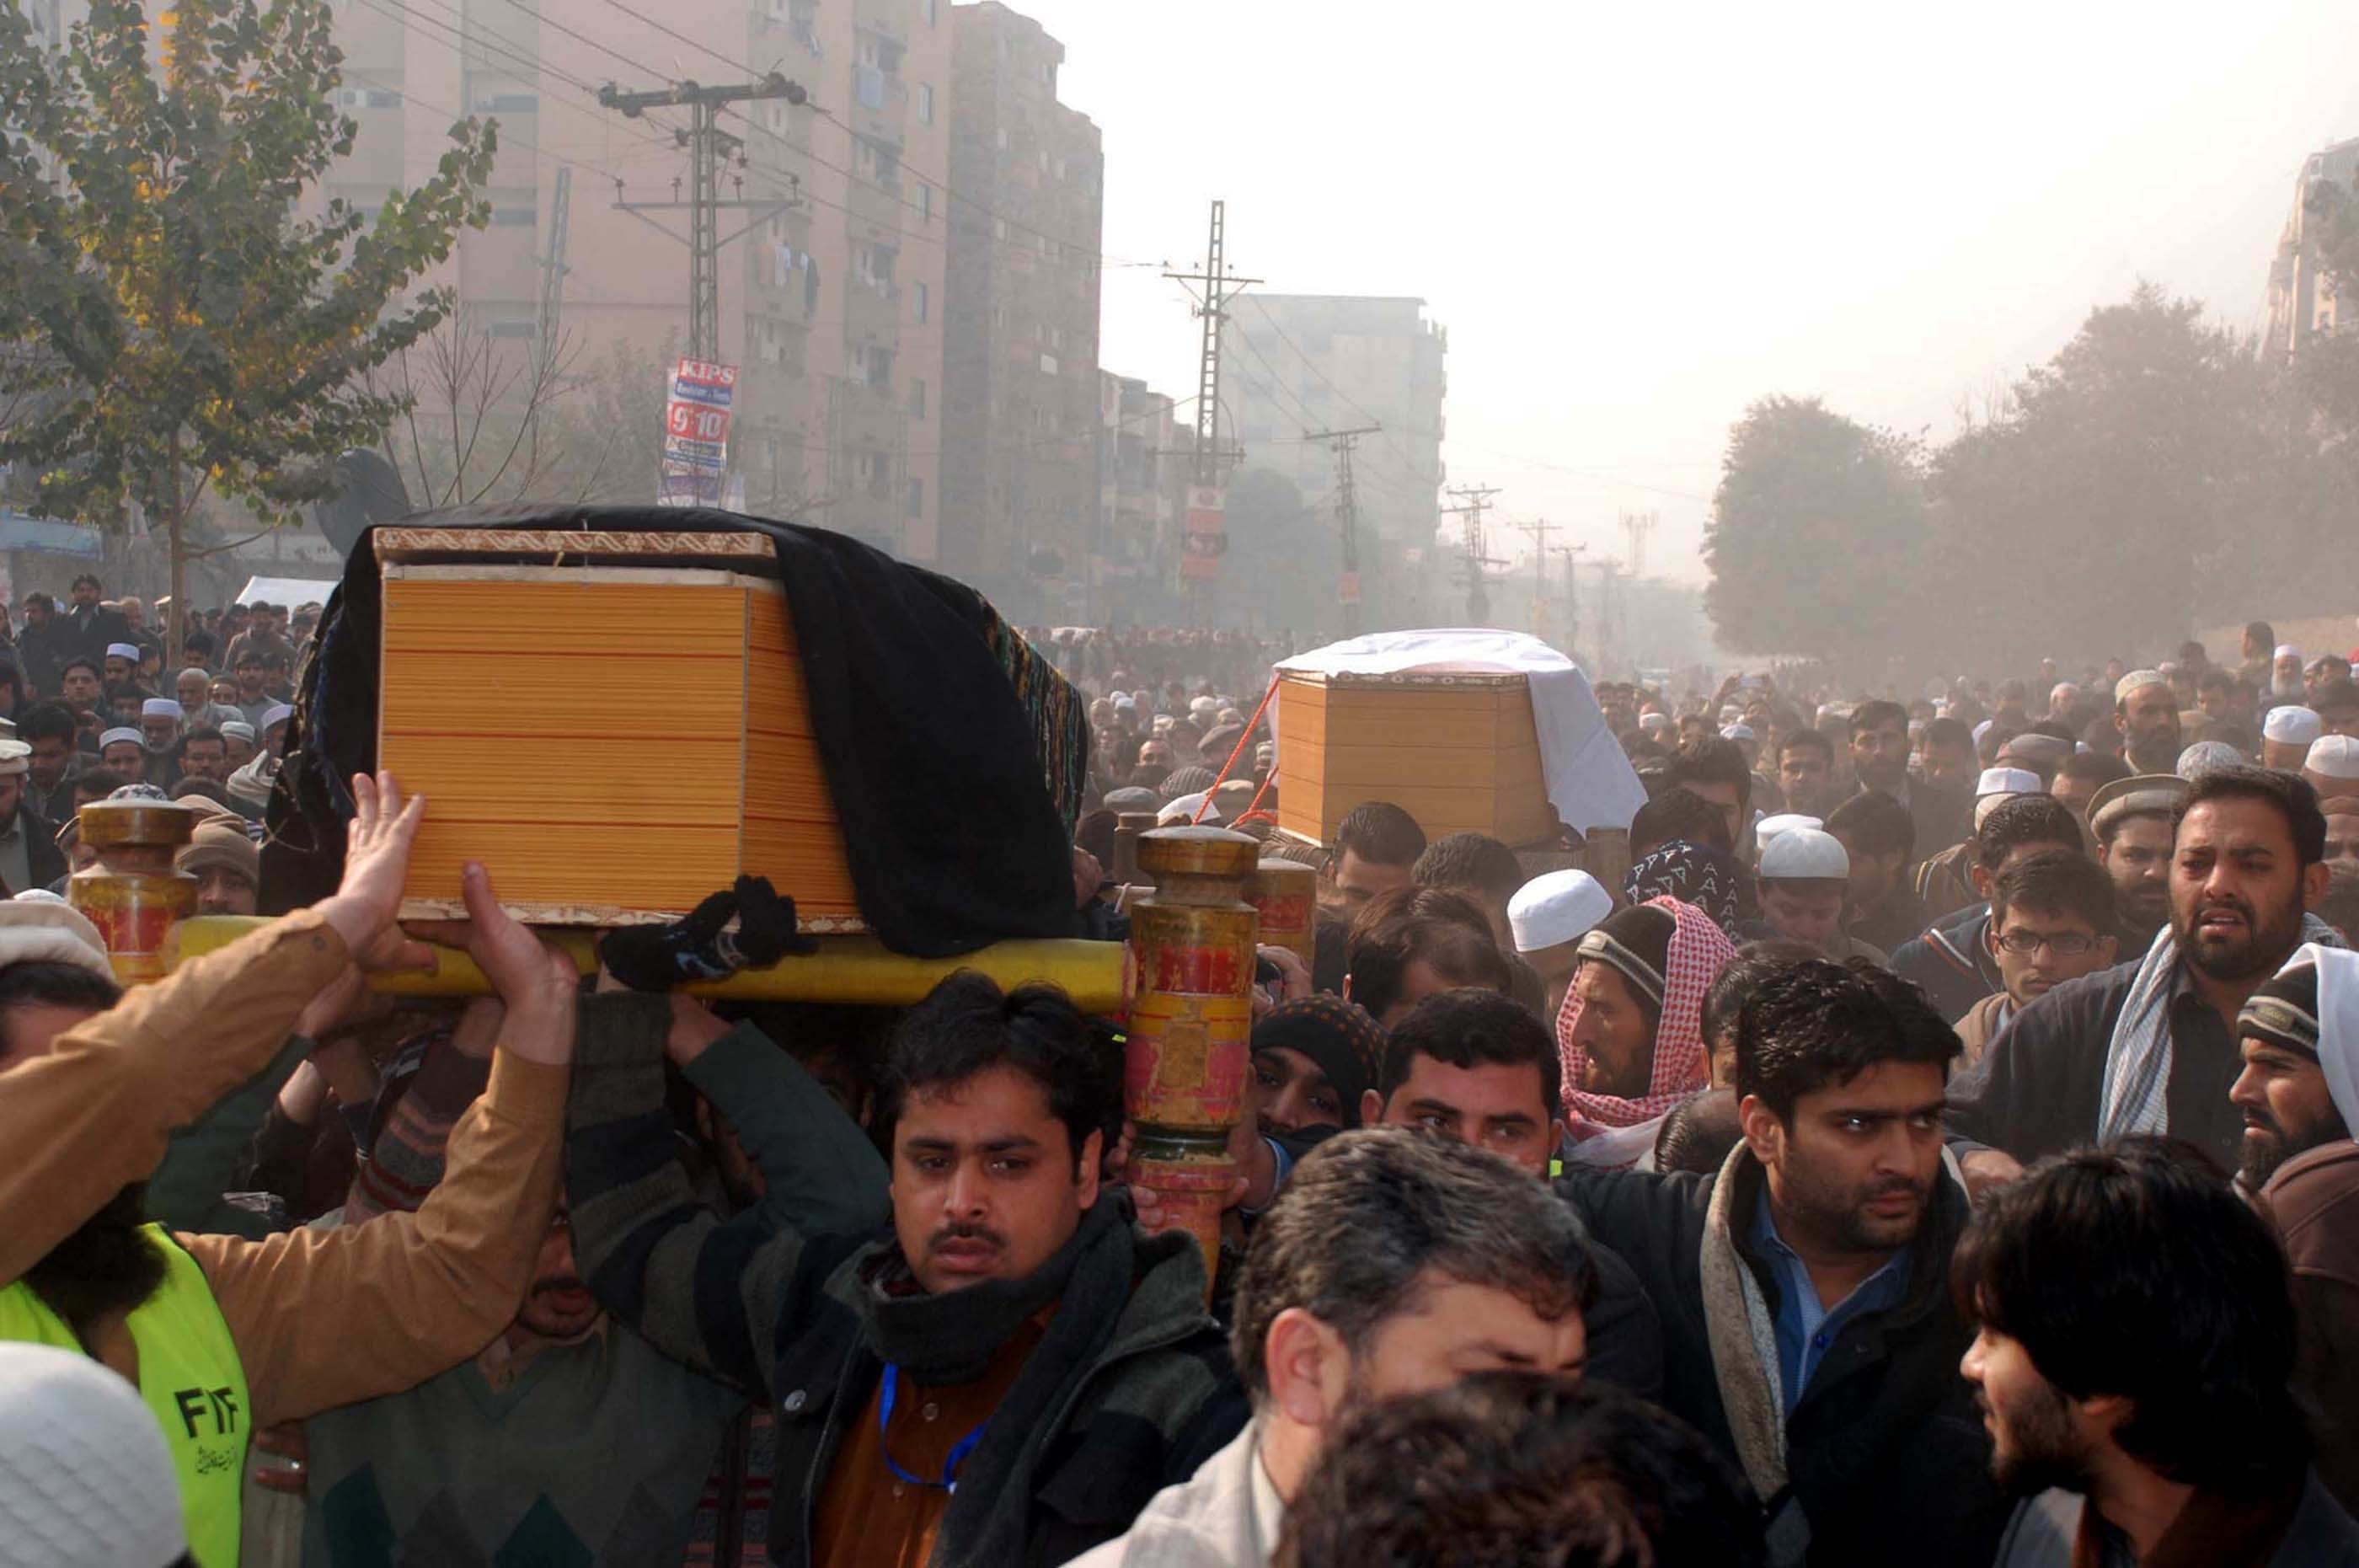 Funeral ceremony for the victims of the school attack in Pakistan